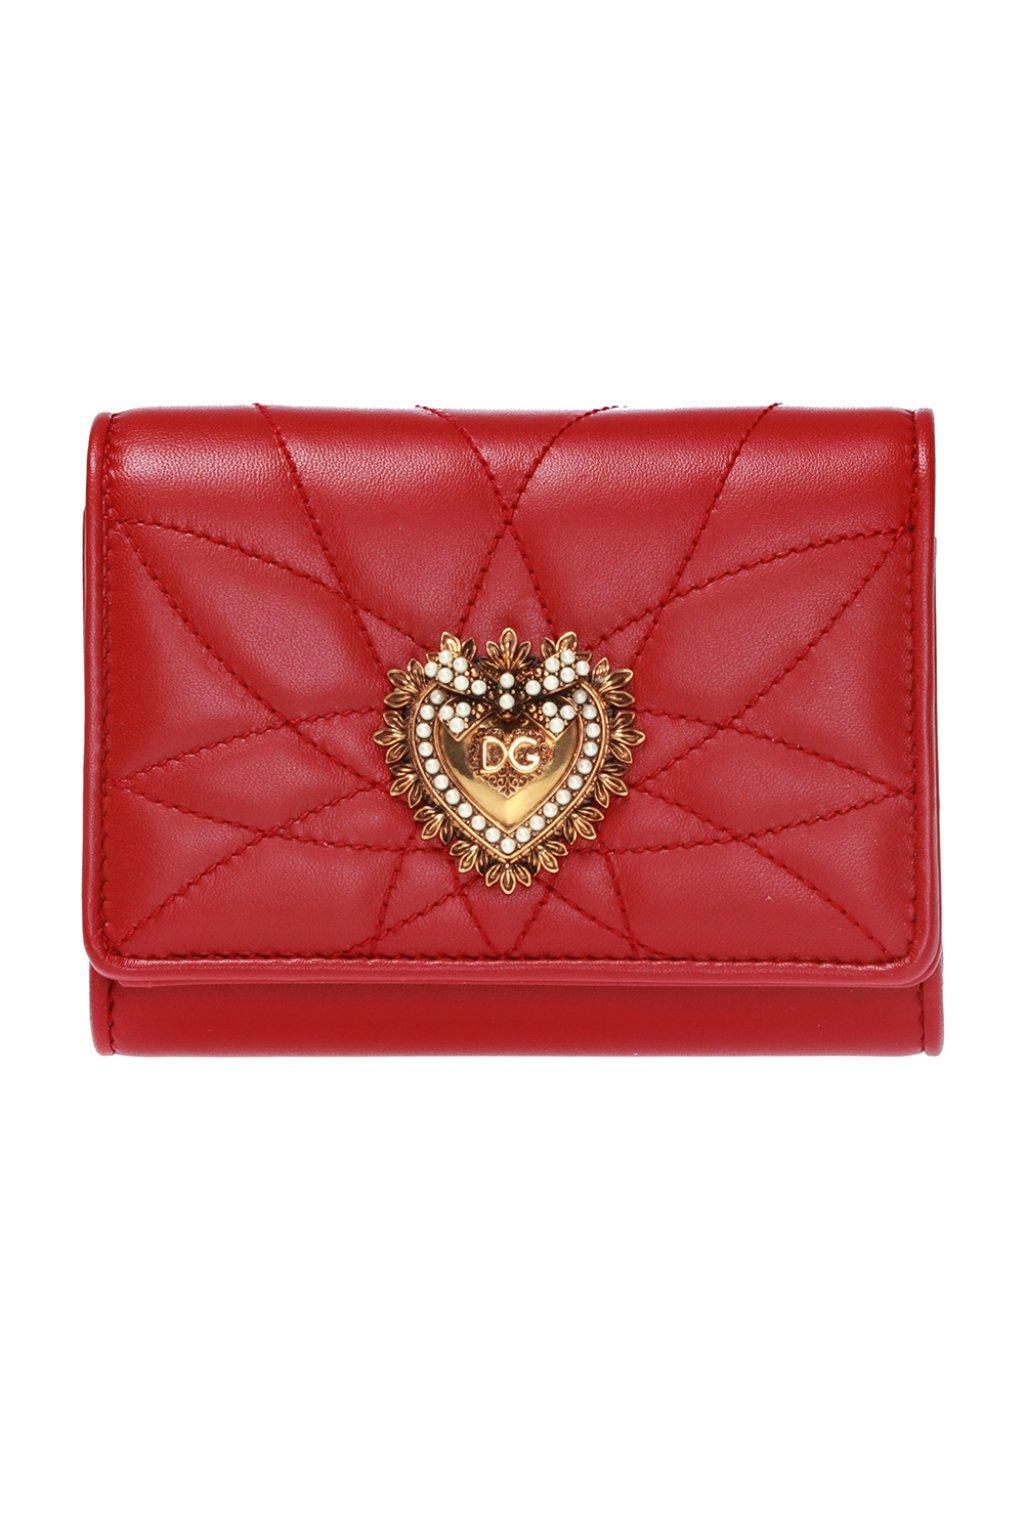 Dolce & Gabbana Leather 'devotion' Quilted Wallet in Red - Lyst